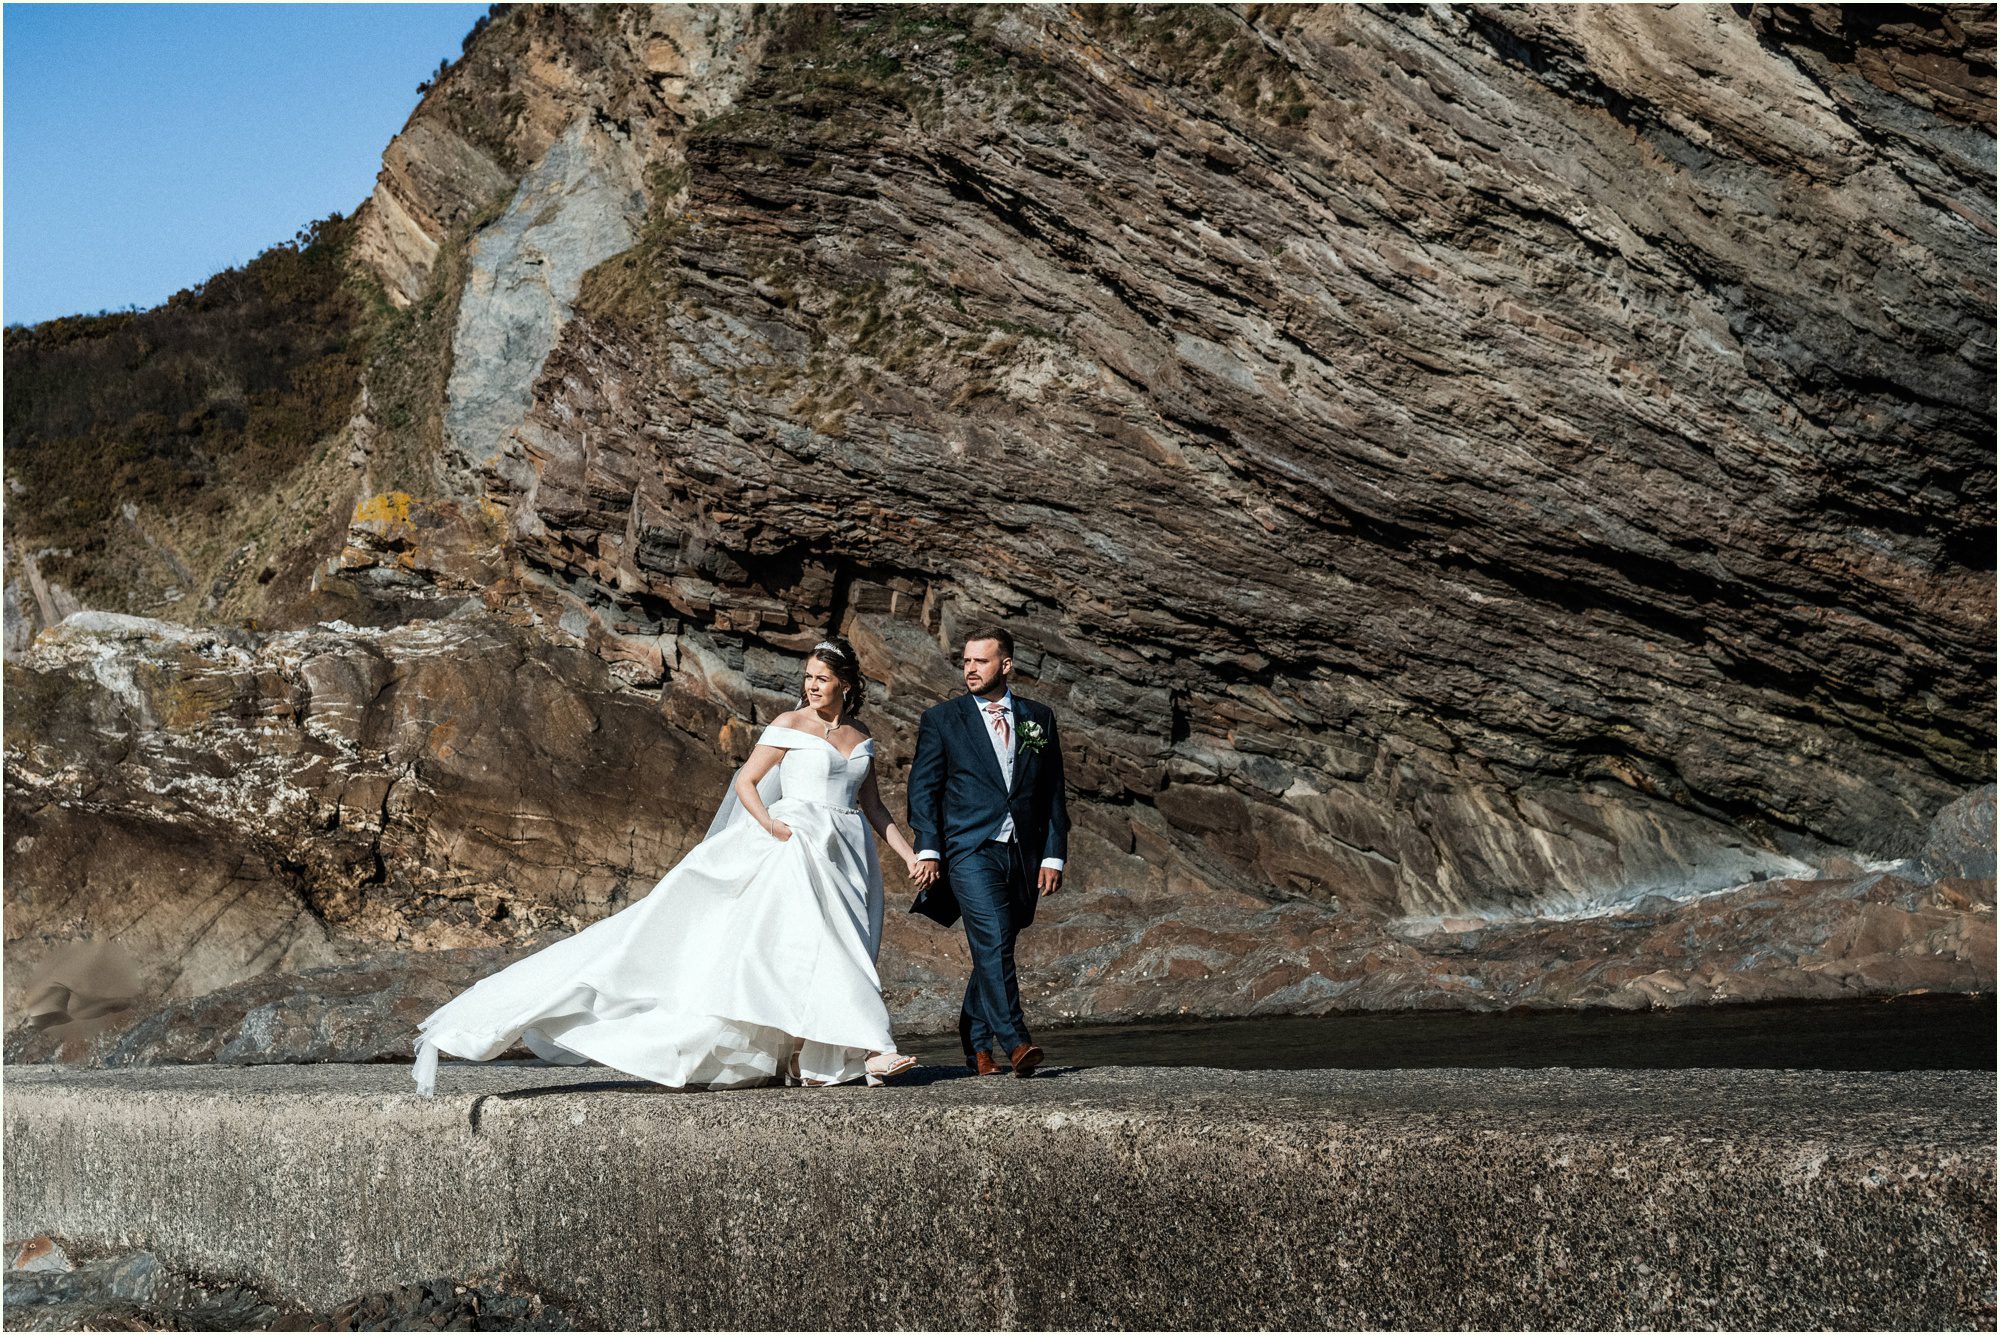 Wedding photography at Sandy Cove